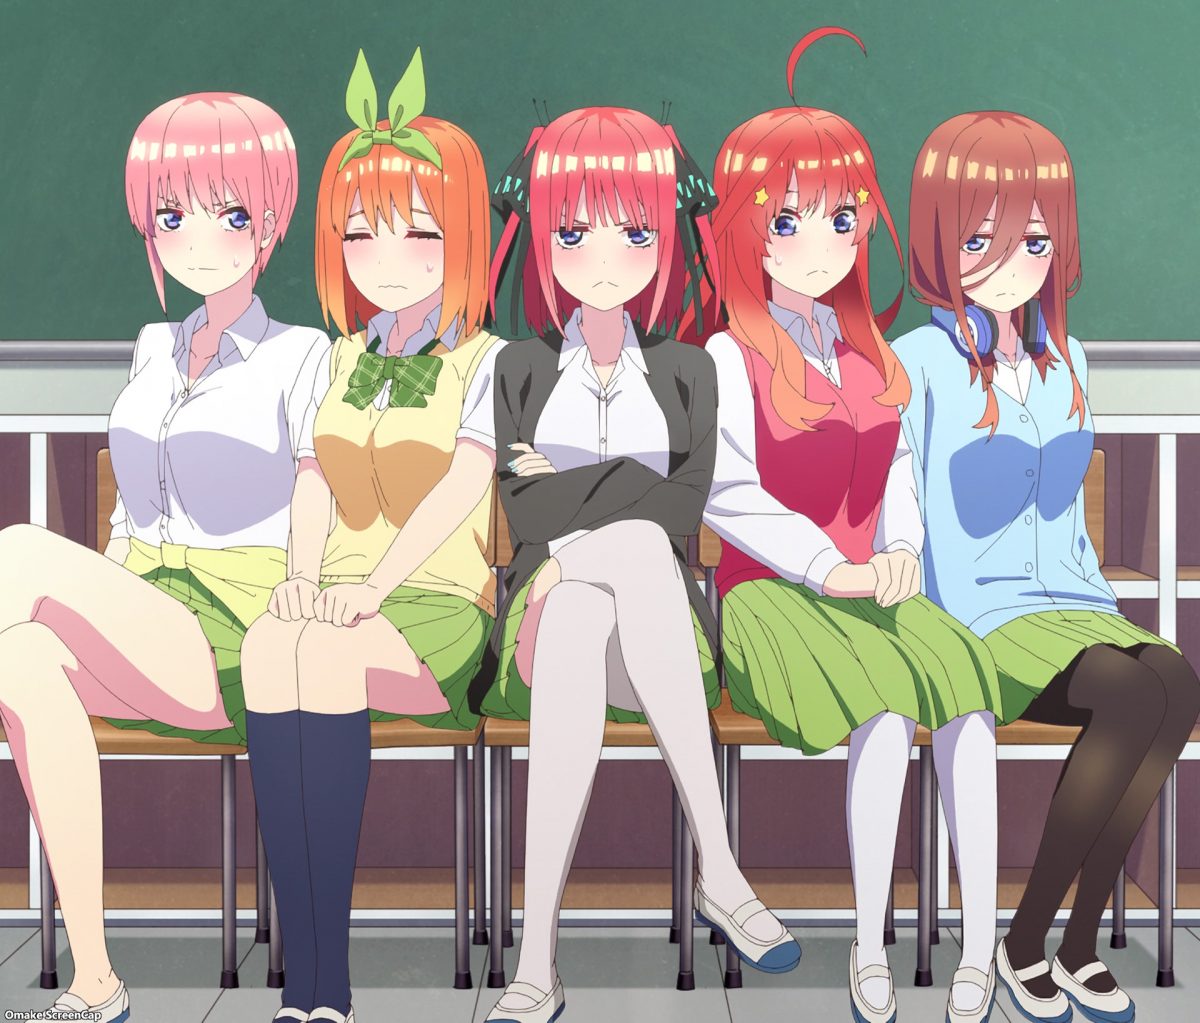 Watch The Quintessential Quintuplets season 2 episode 10 streaming